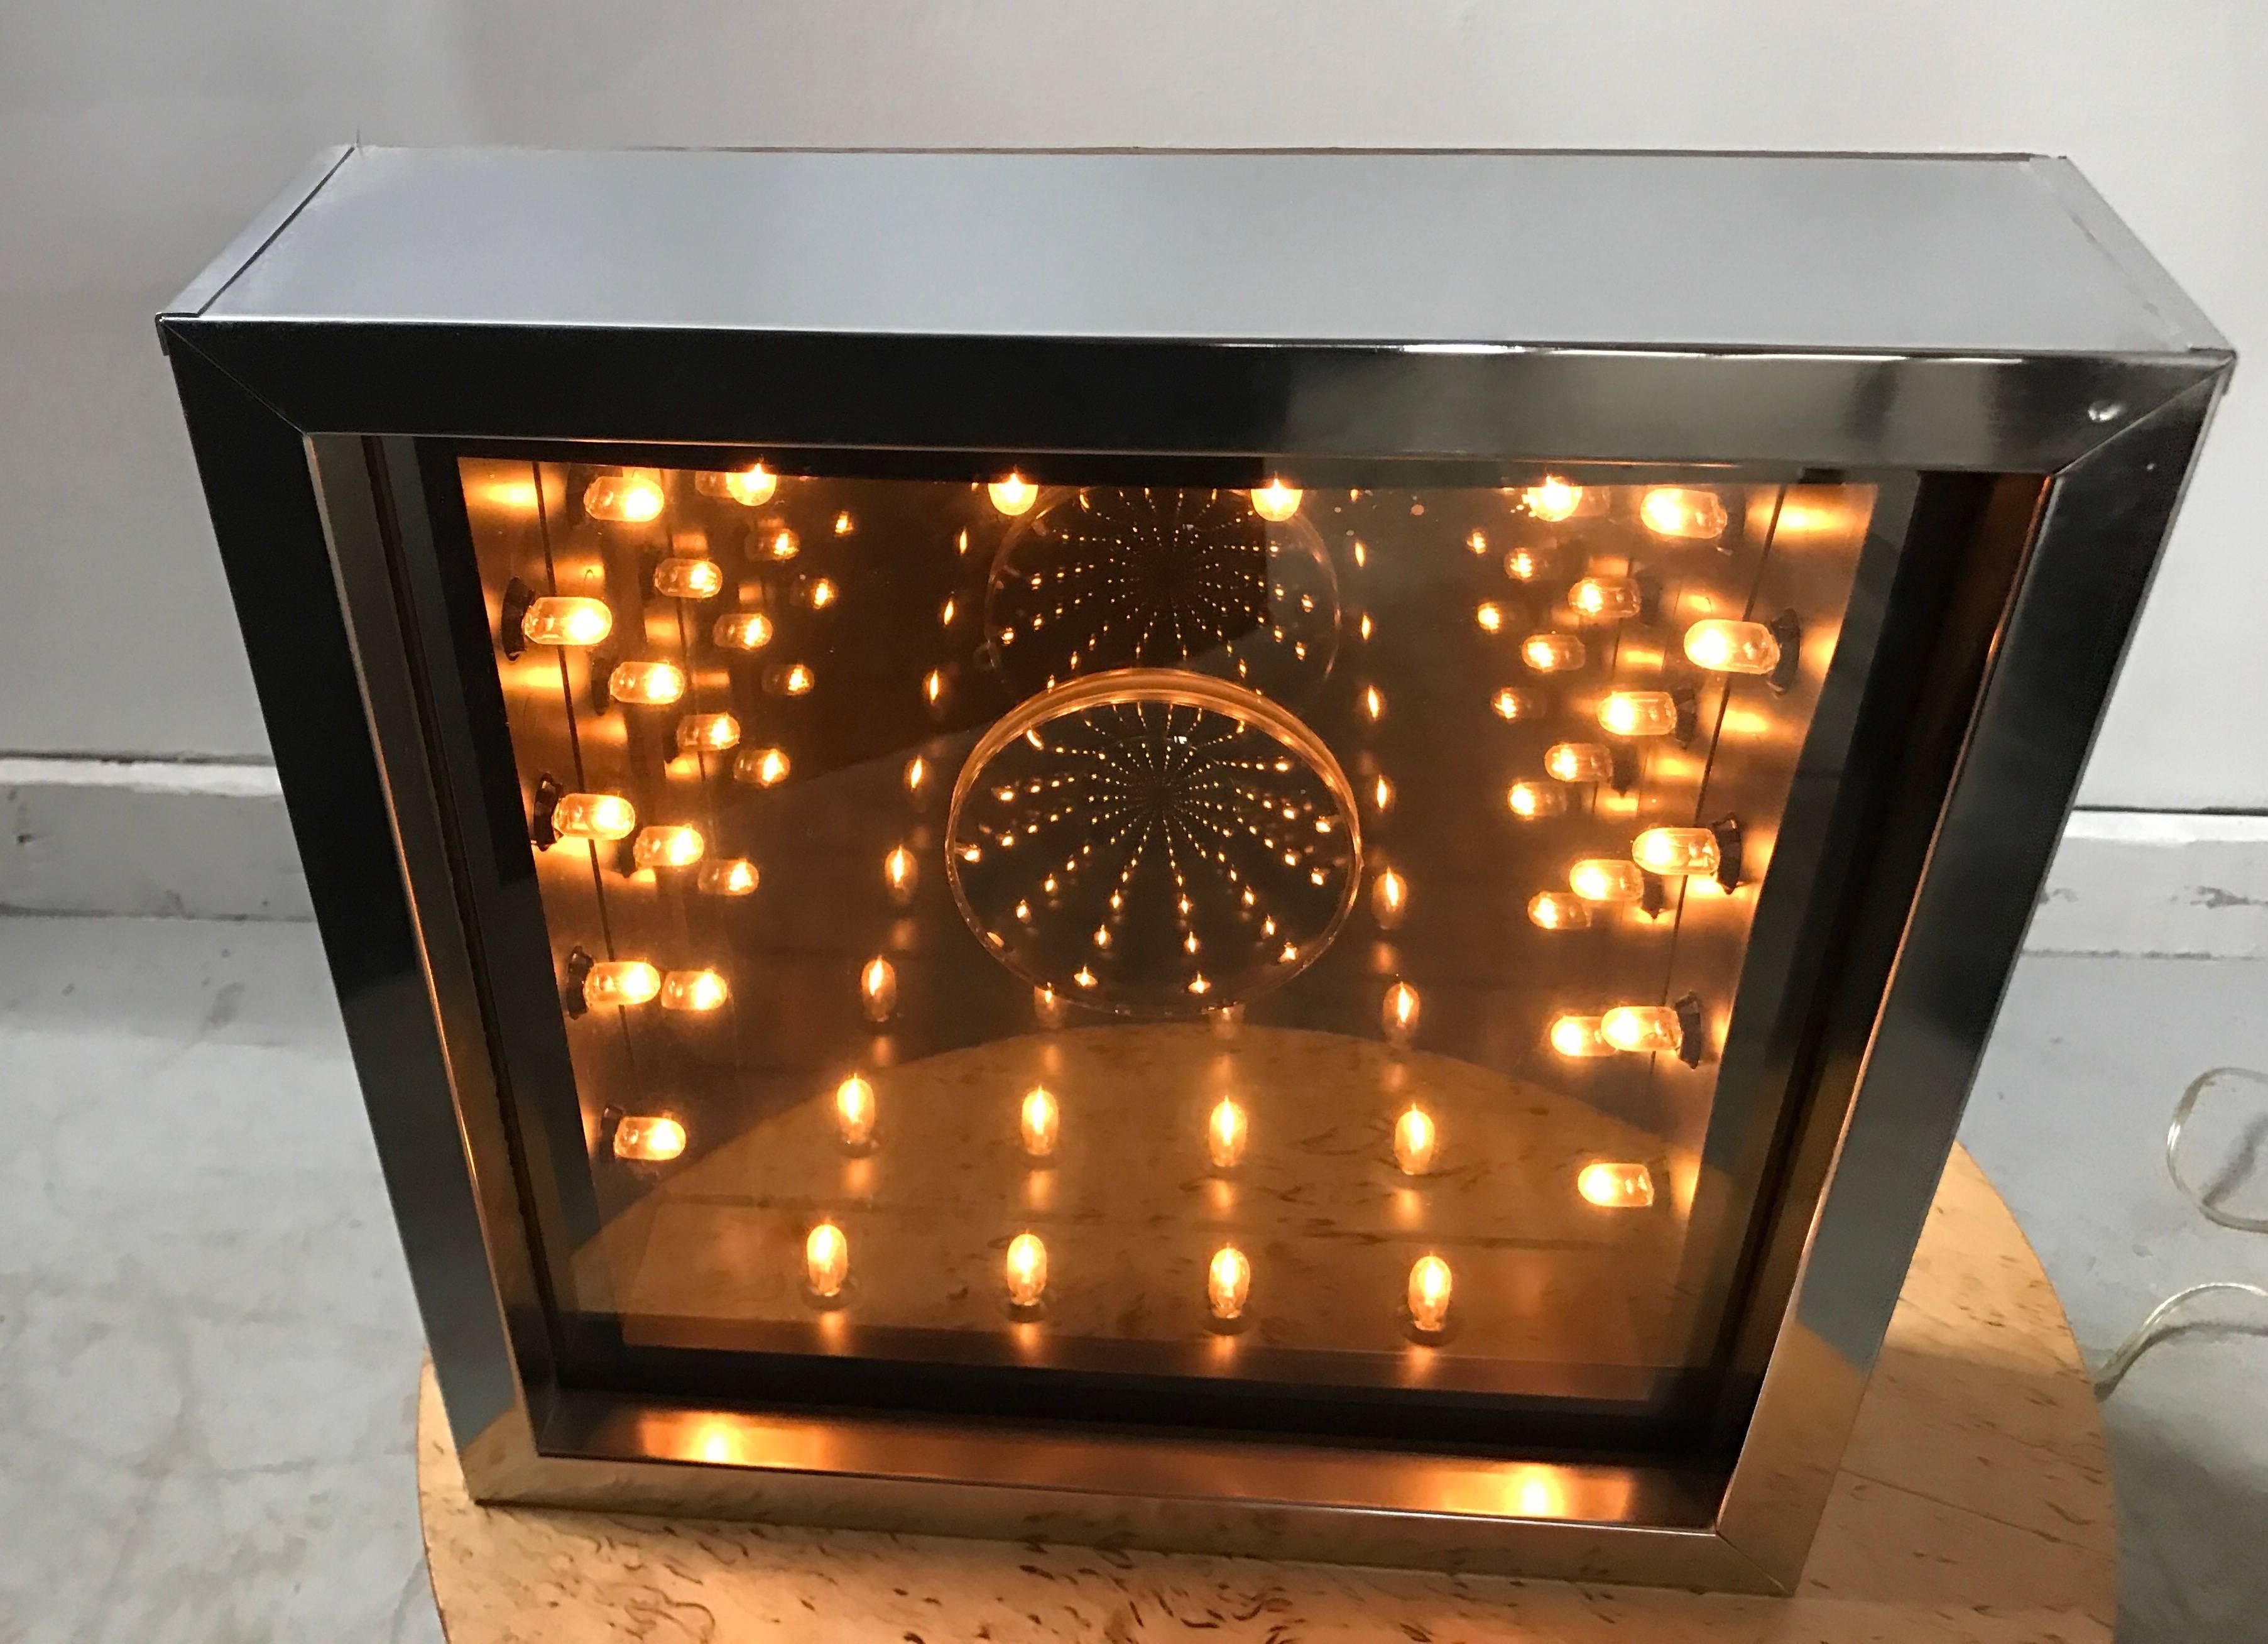 Pop Modernist infinity mirror manufactured by Neo Art Co, unusual size, wall hanging or tabletop, excellent original condition.